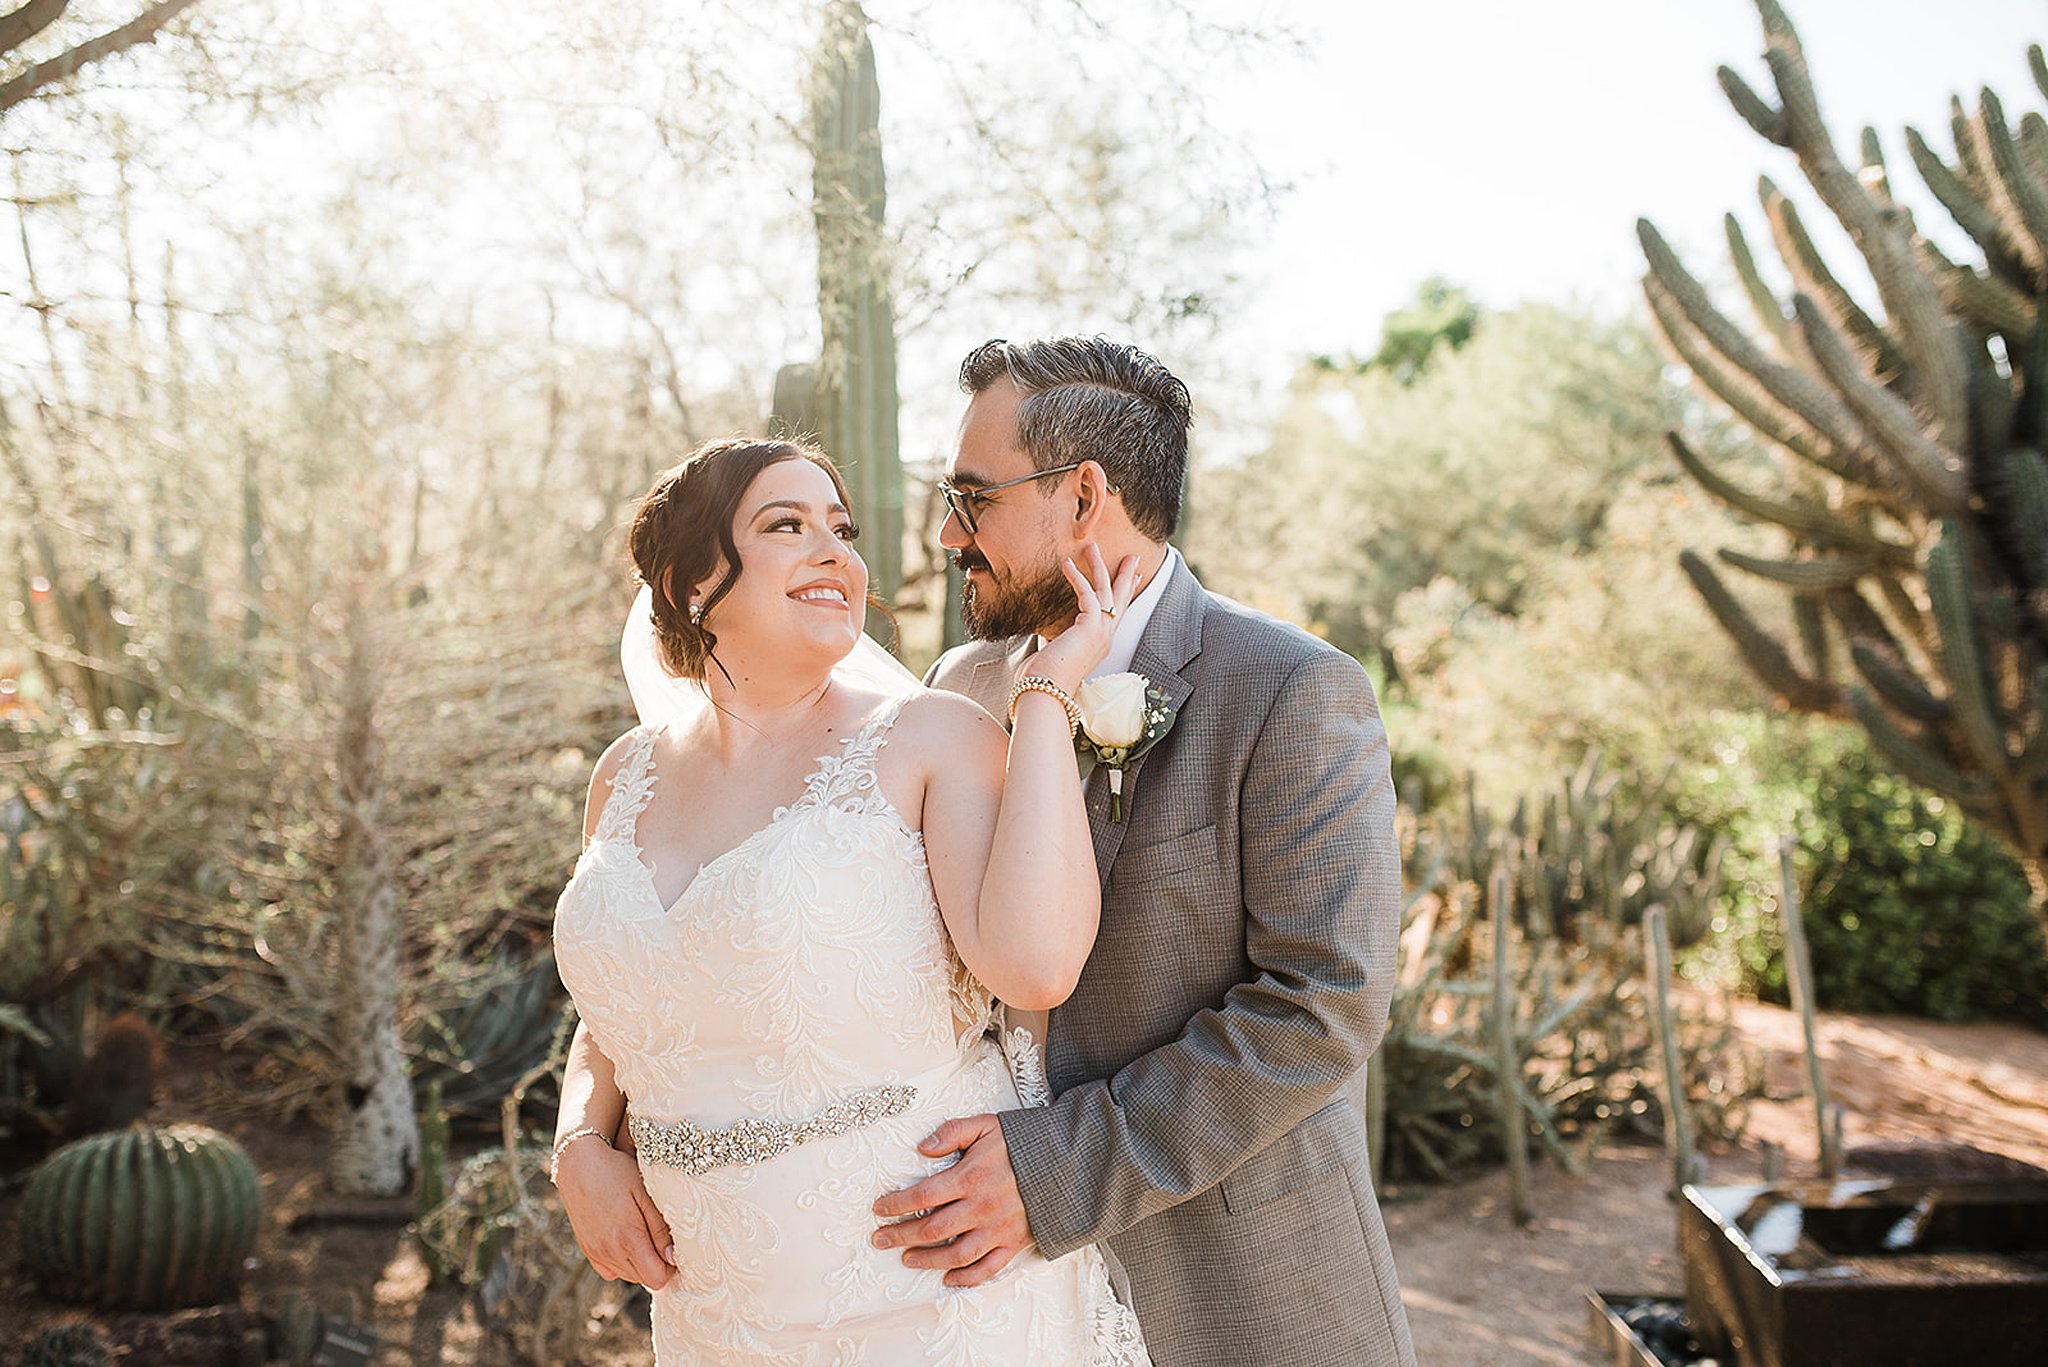 bride holding her groom's face as he hugs her from behind at their desert botanical gardens wedding